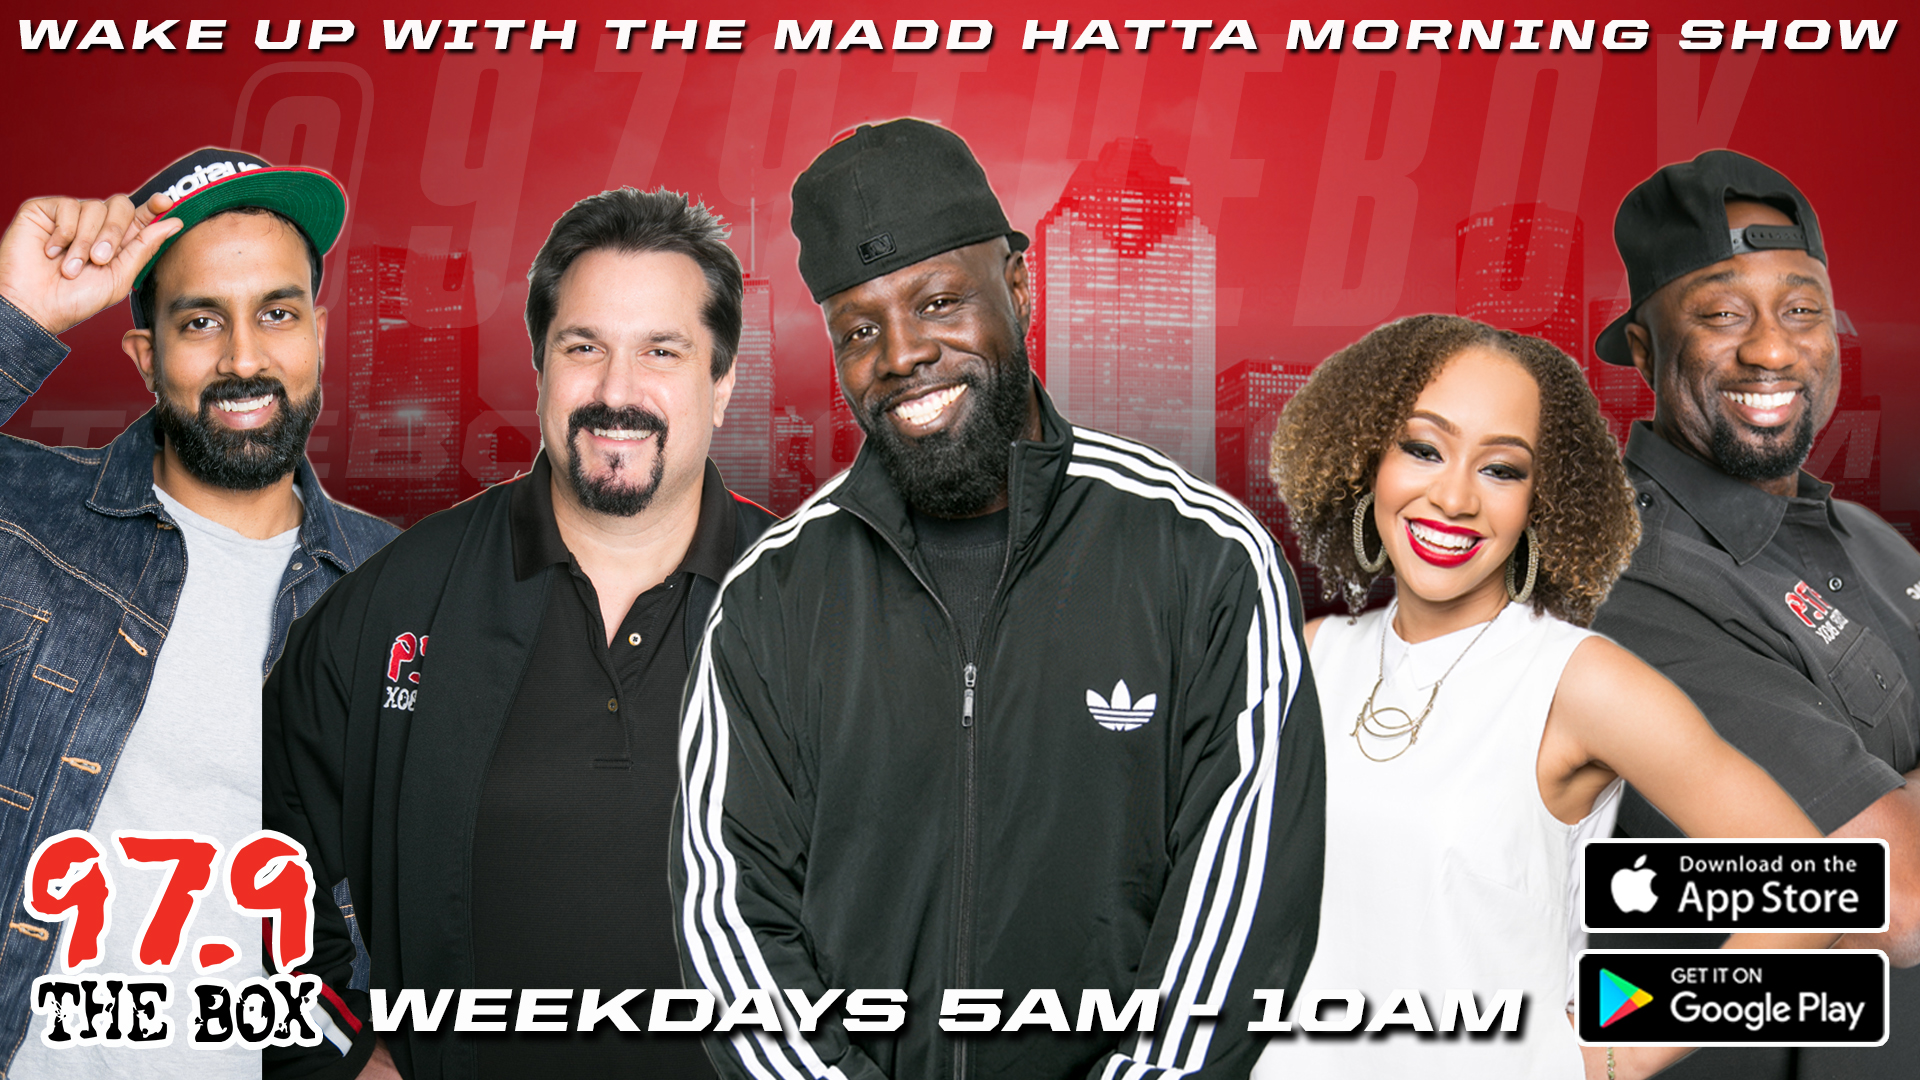 Page 27 of 285 - Madd Hatta Morning Show Archives - 97.9 The Box